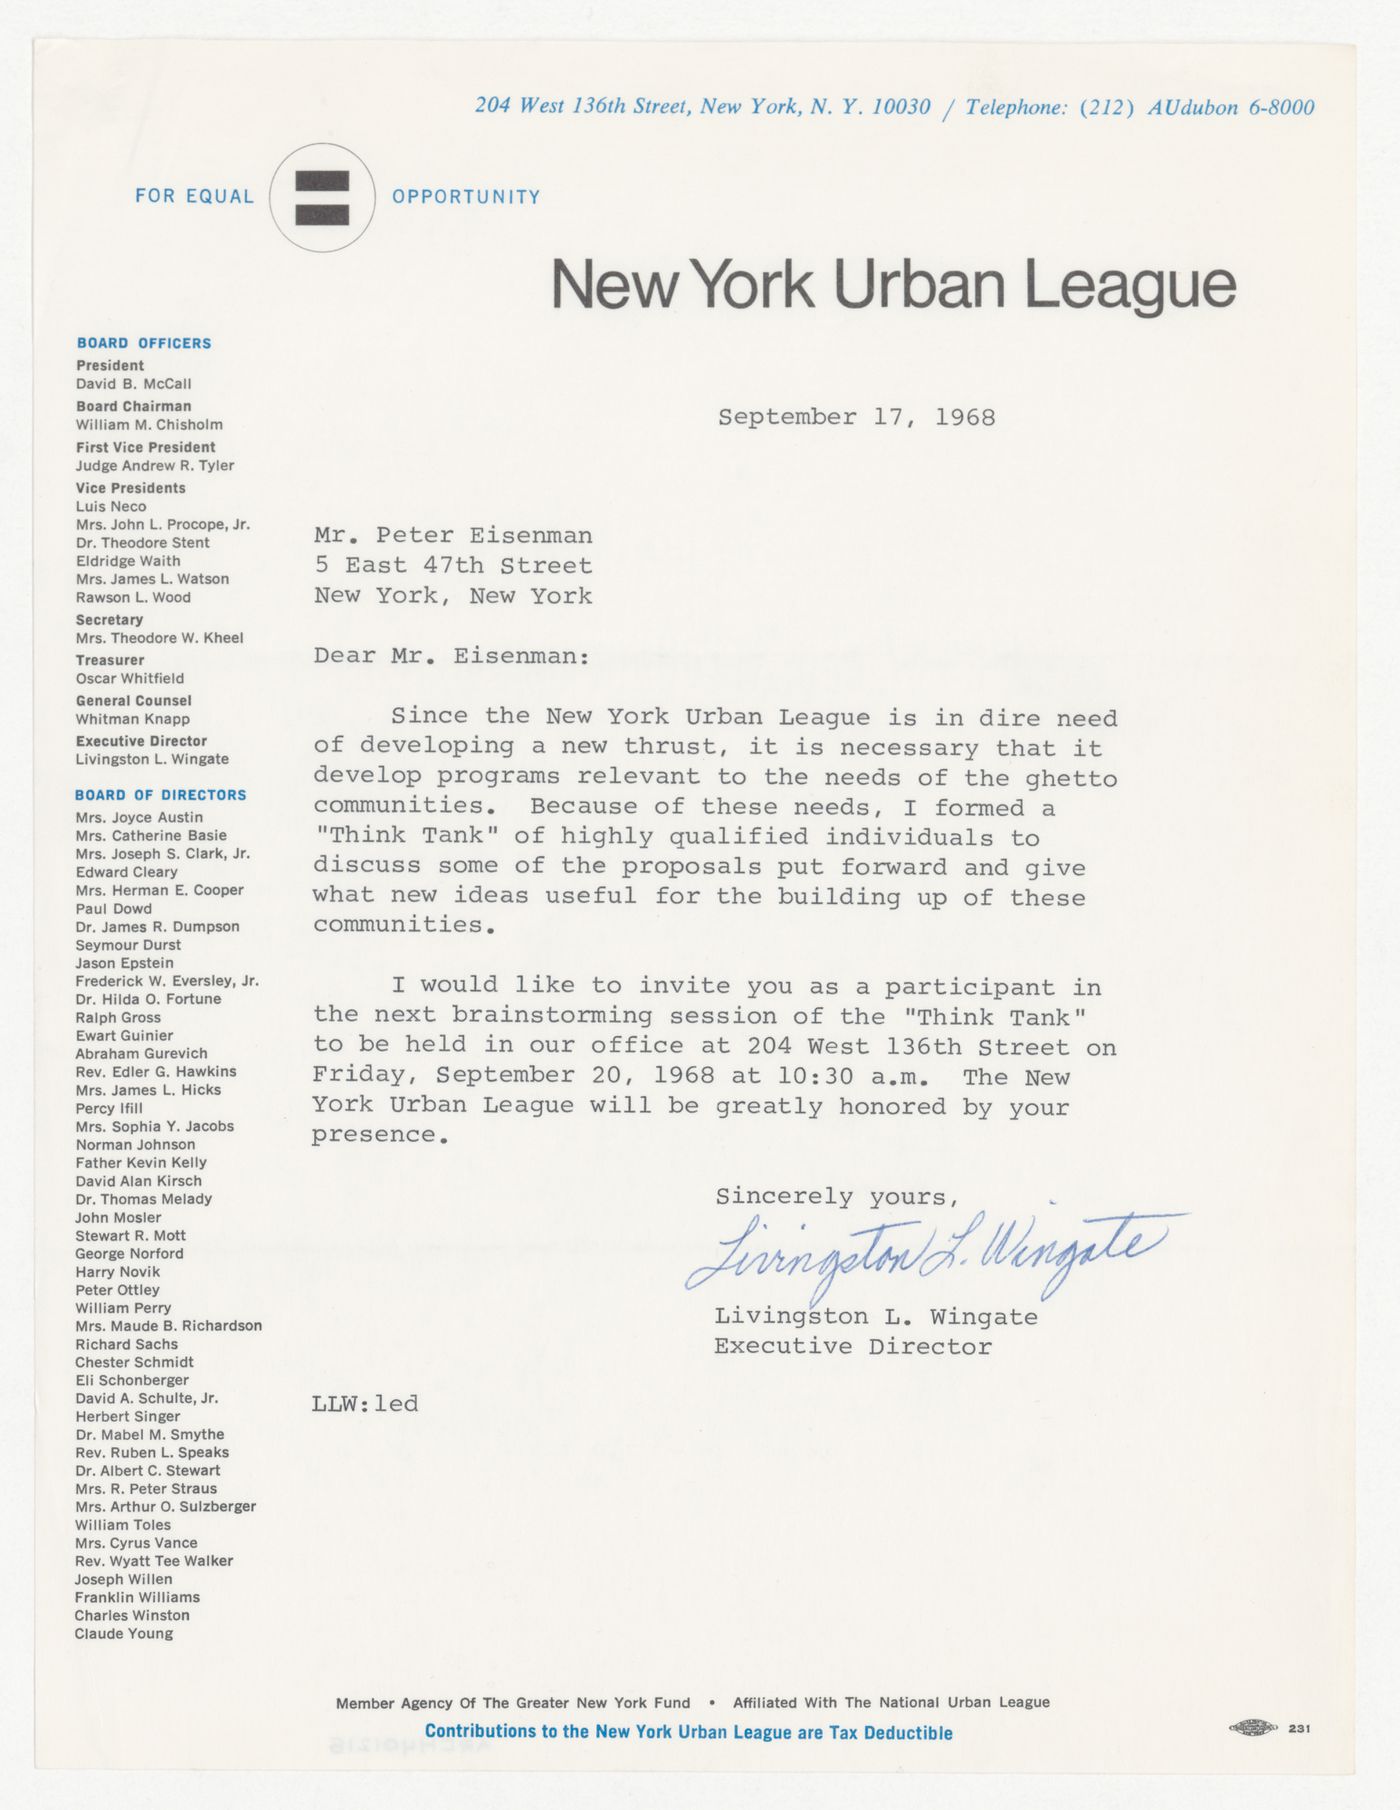 Letter from Livingston L. Wingate to Peter D. Eisenman inviting Eisenman to participate in New York Urban League "think tank" brainstorming session